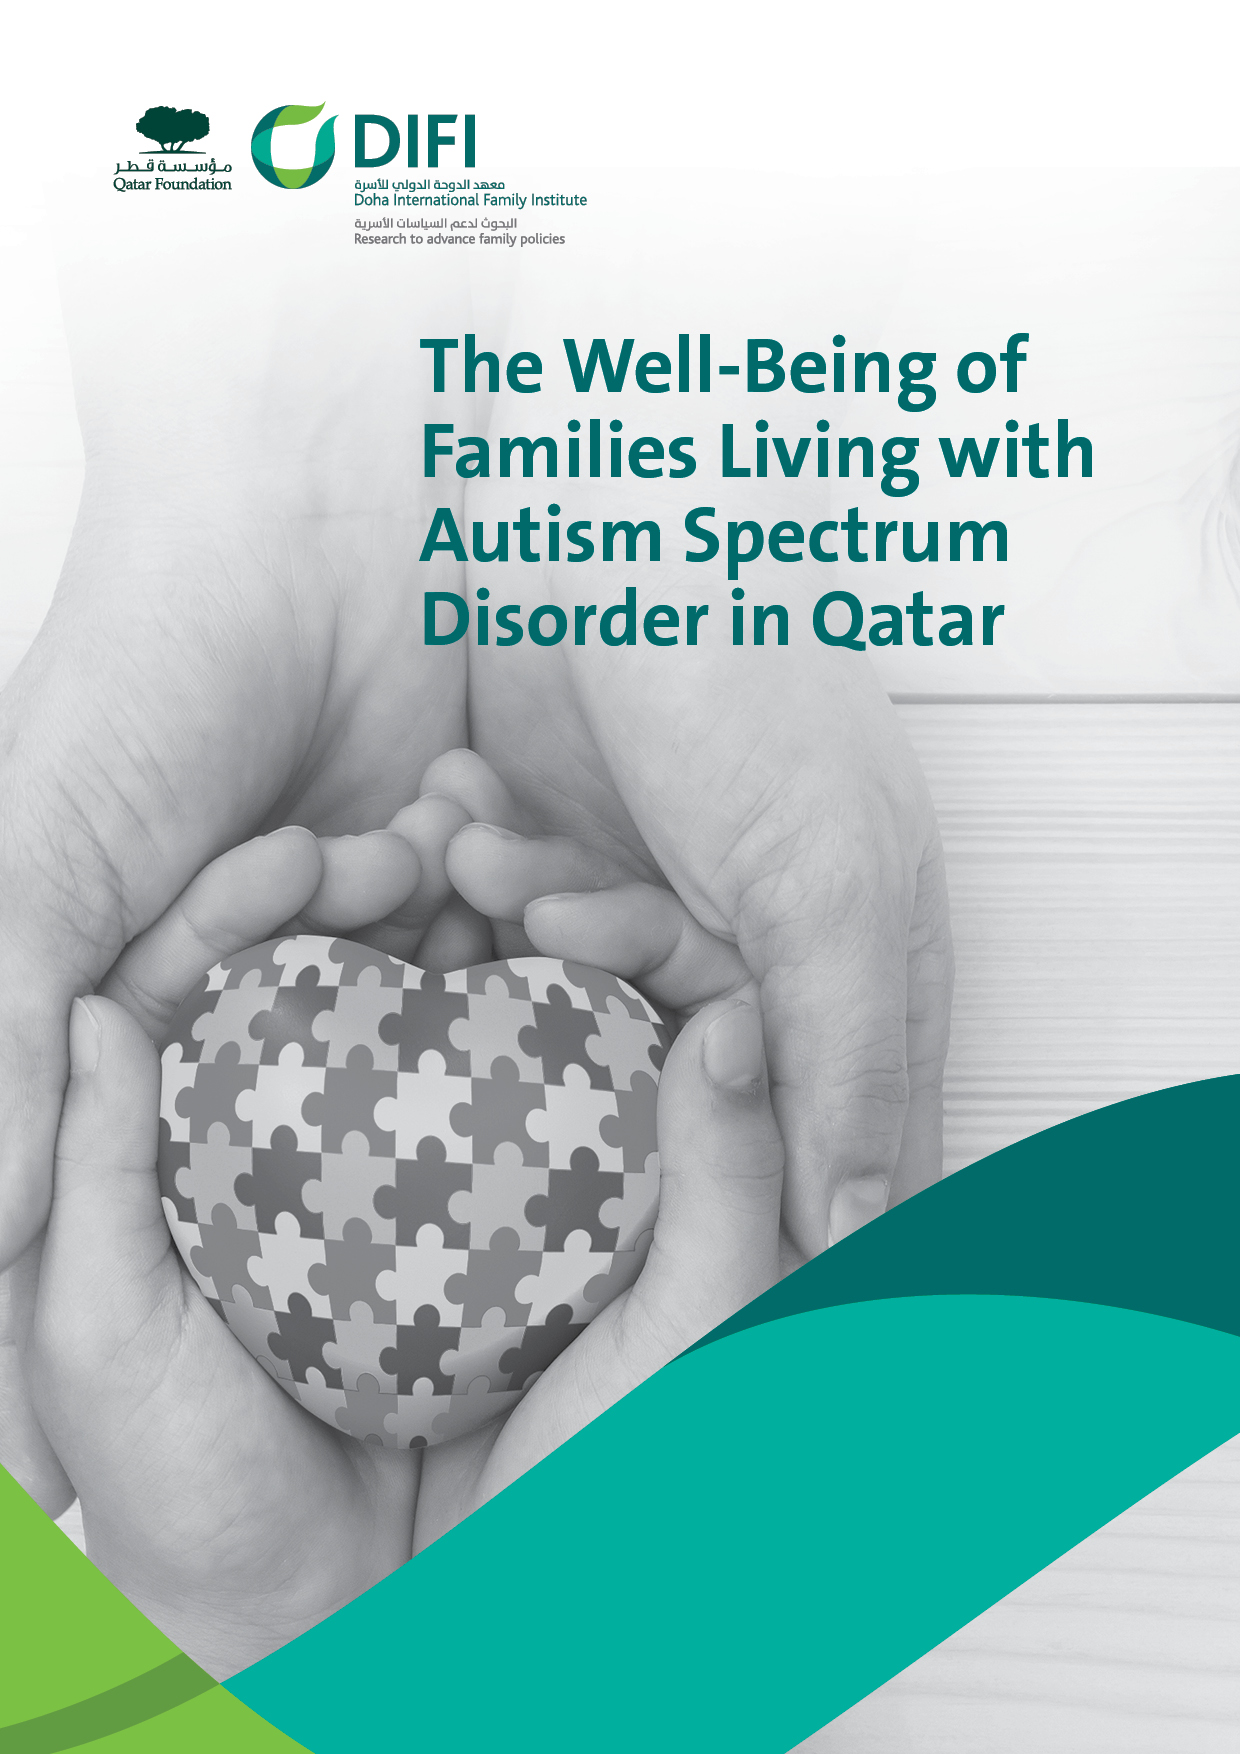 The Well-Being of Families Living with Autism Spectrum Disorder in Qatar